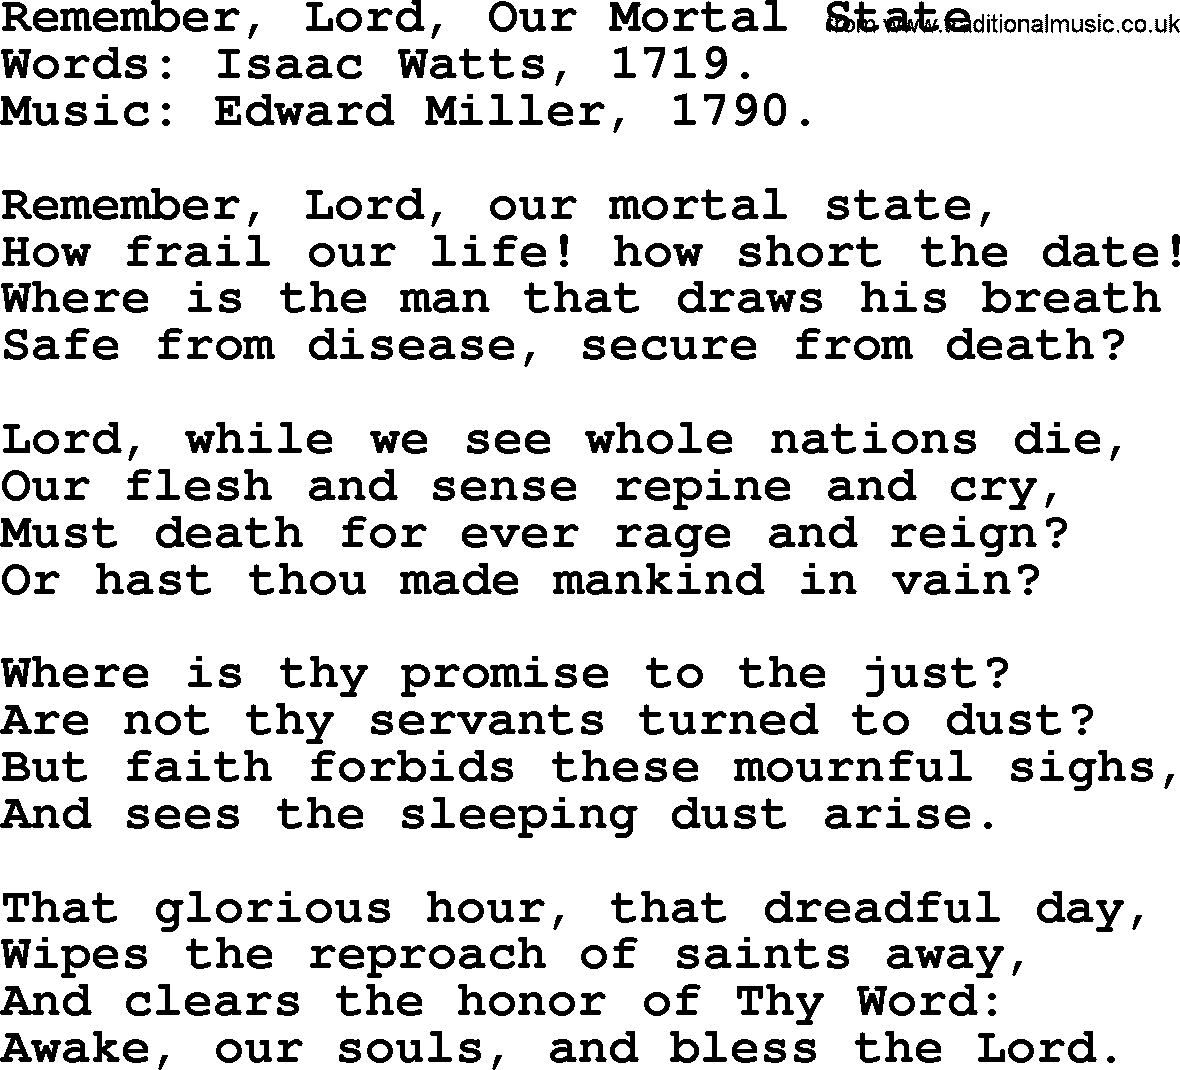 Isaac Watts Christian hymn: Remember, Lord, Our Mortal State- lyricss